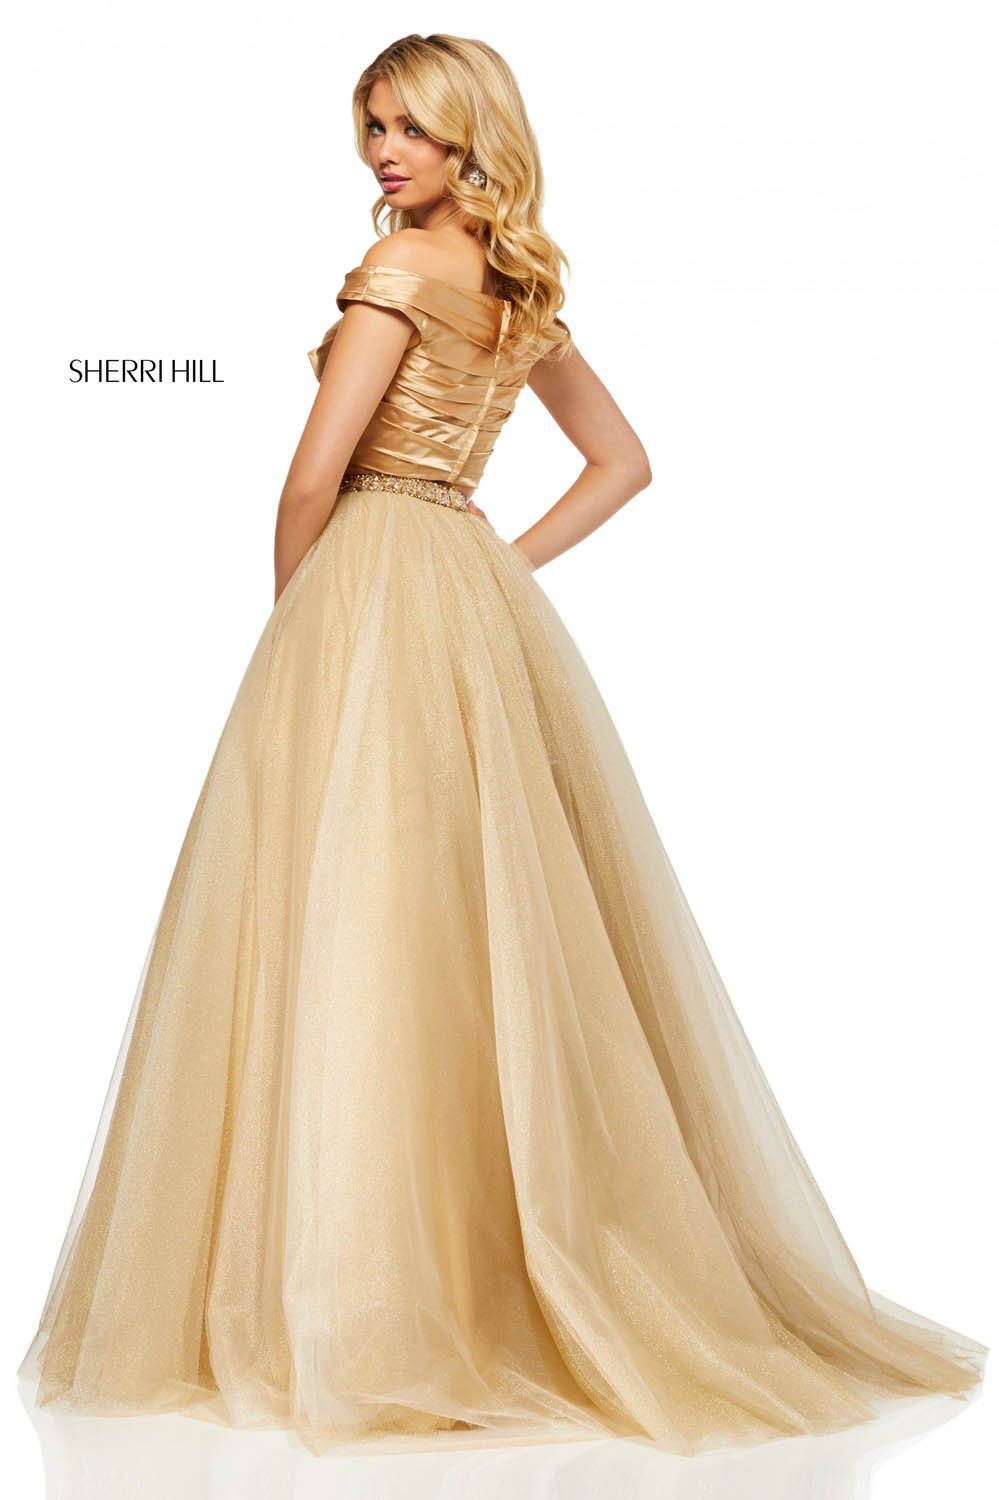 Sherri Hill 52406 dress images in these colors: Gold.